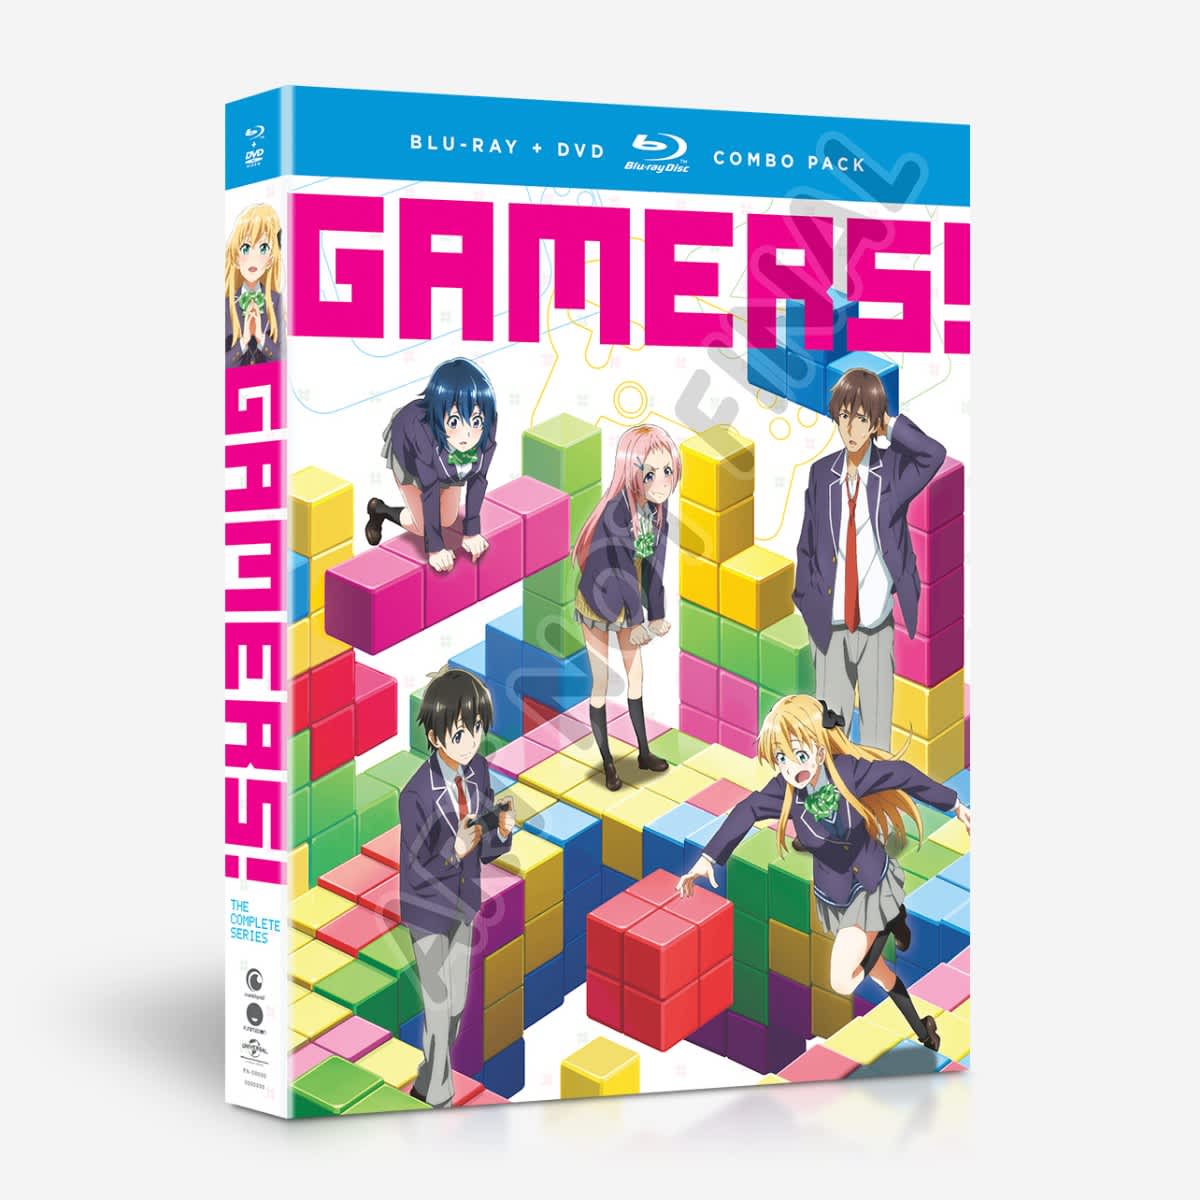 The Gamer, Season 1 by NOT A BOOK